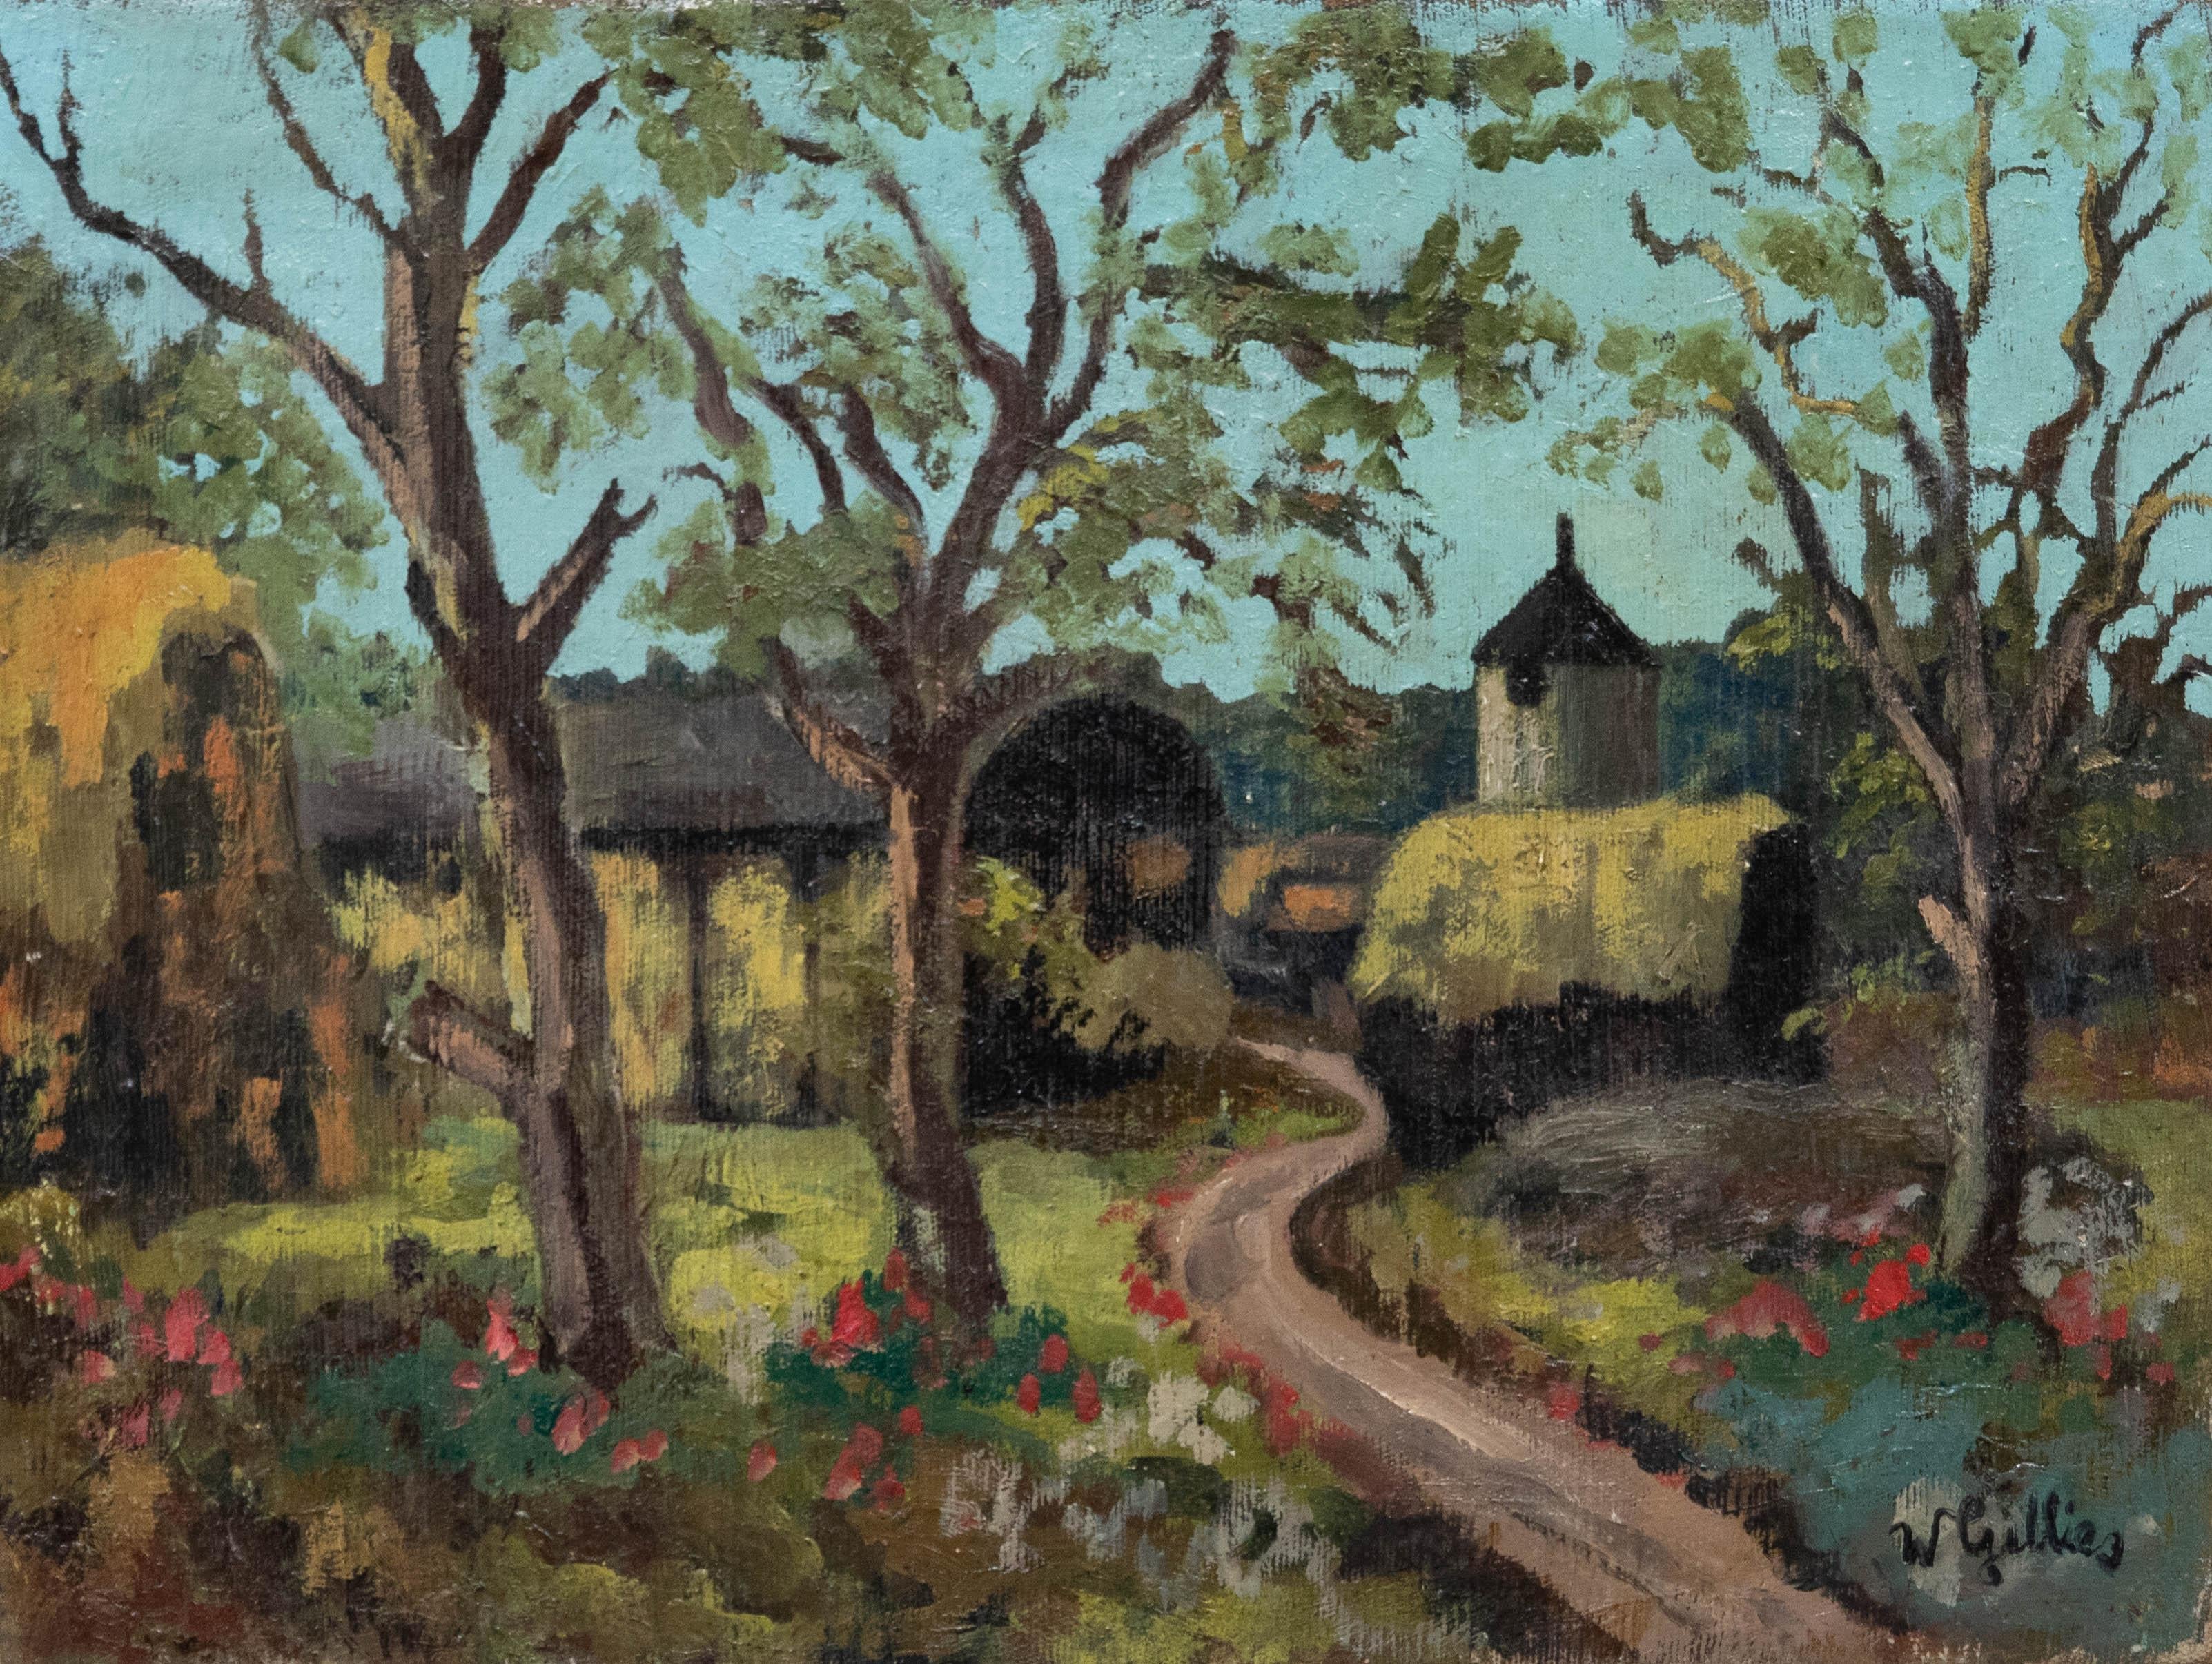 Unknown Landscape Painting - Follower of William G. Gillies (1898-1973)  - Mid 20th Century Oil, Farm Drive